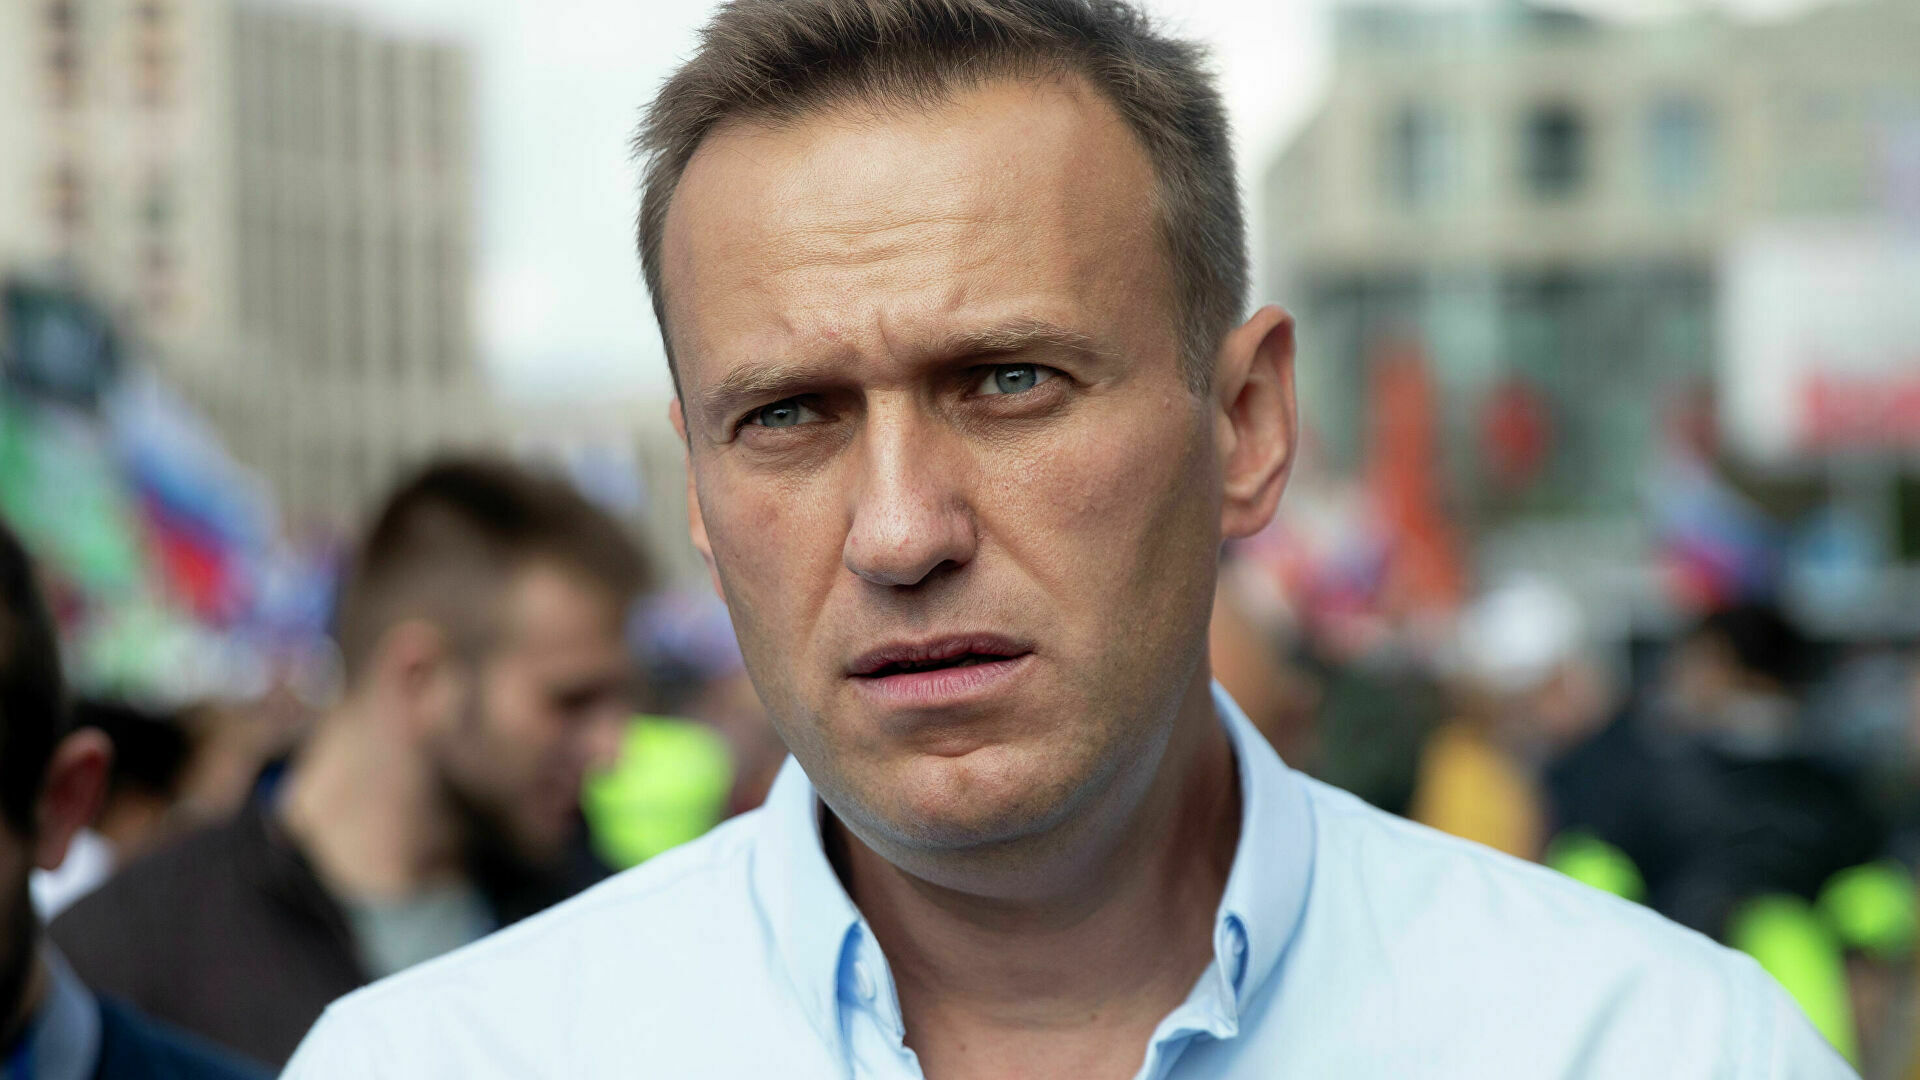 More than 50 countries urged Russia to investigate Navalny's poisoning